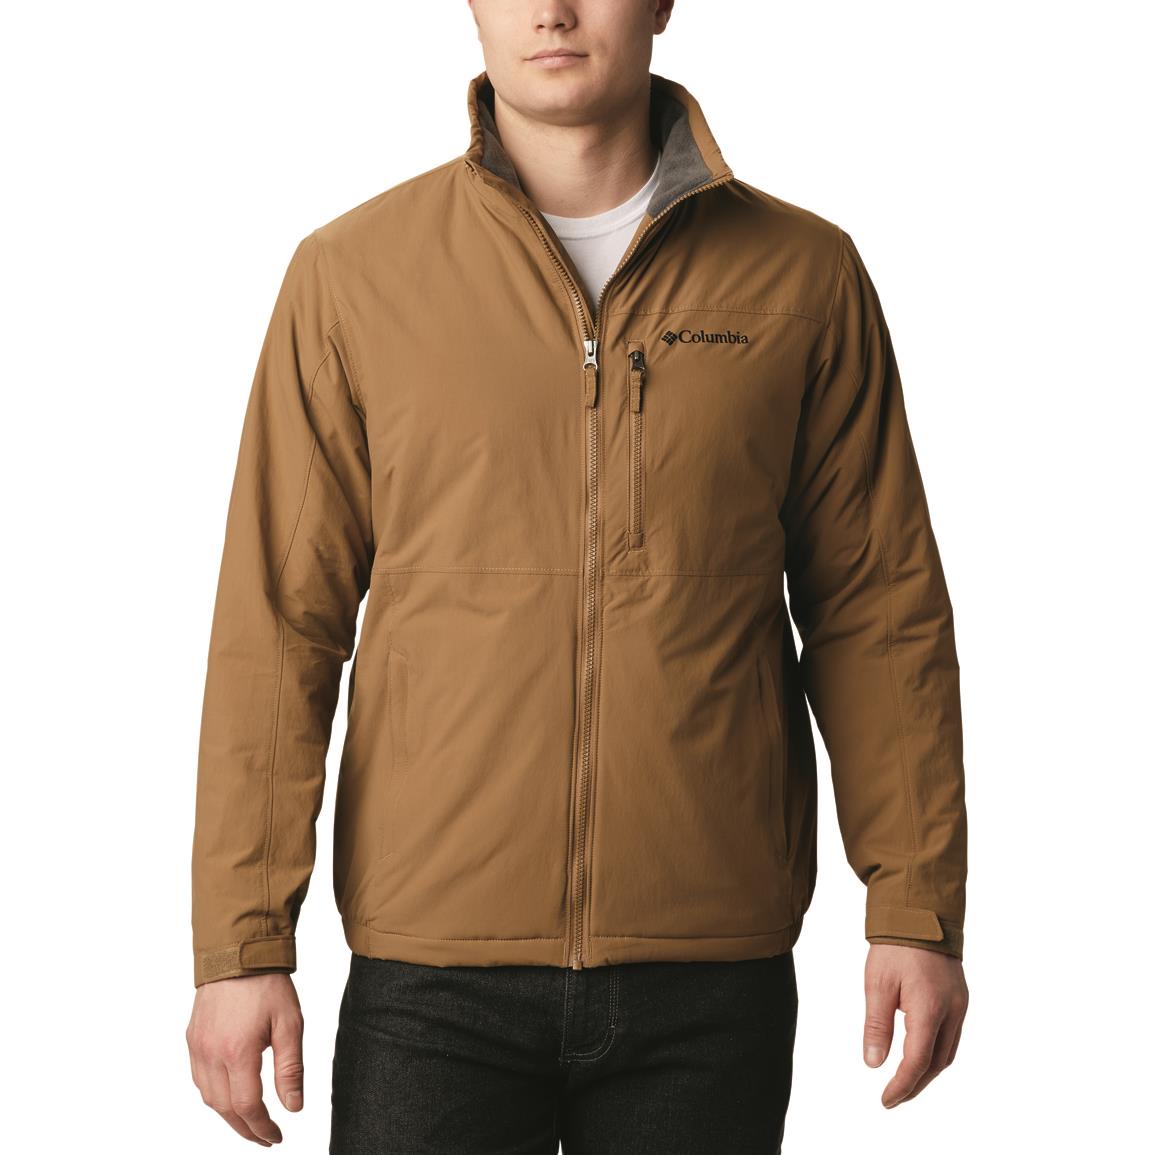 Columbia Men's Northern Utilizer Insulated Lined Jacket, Delta